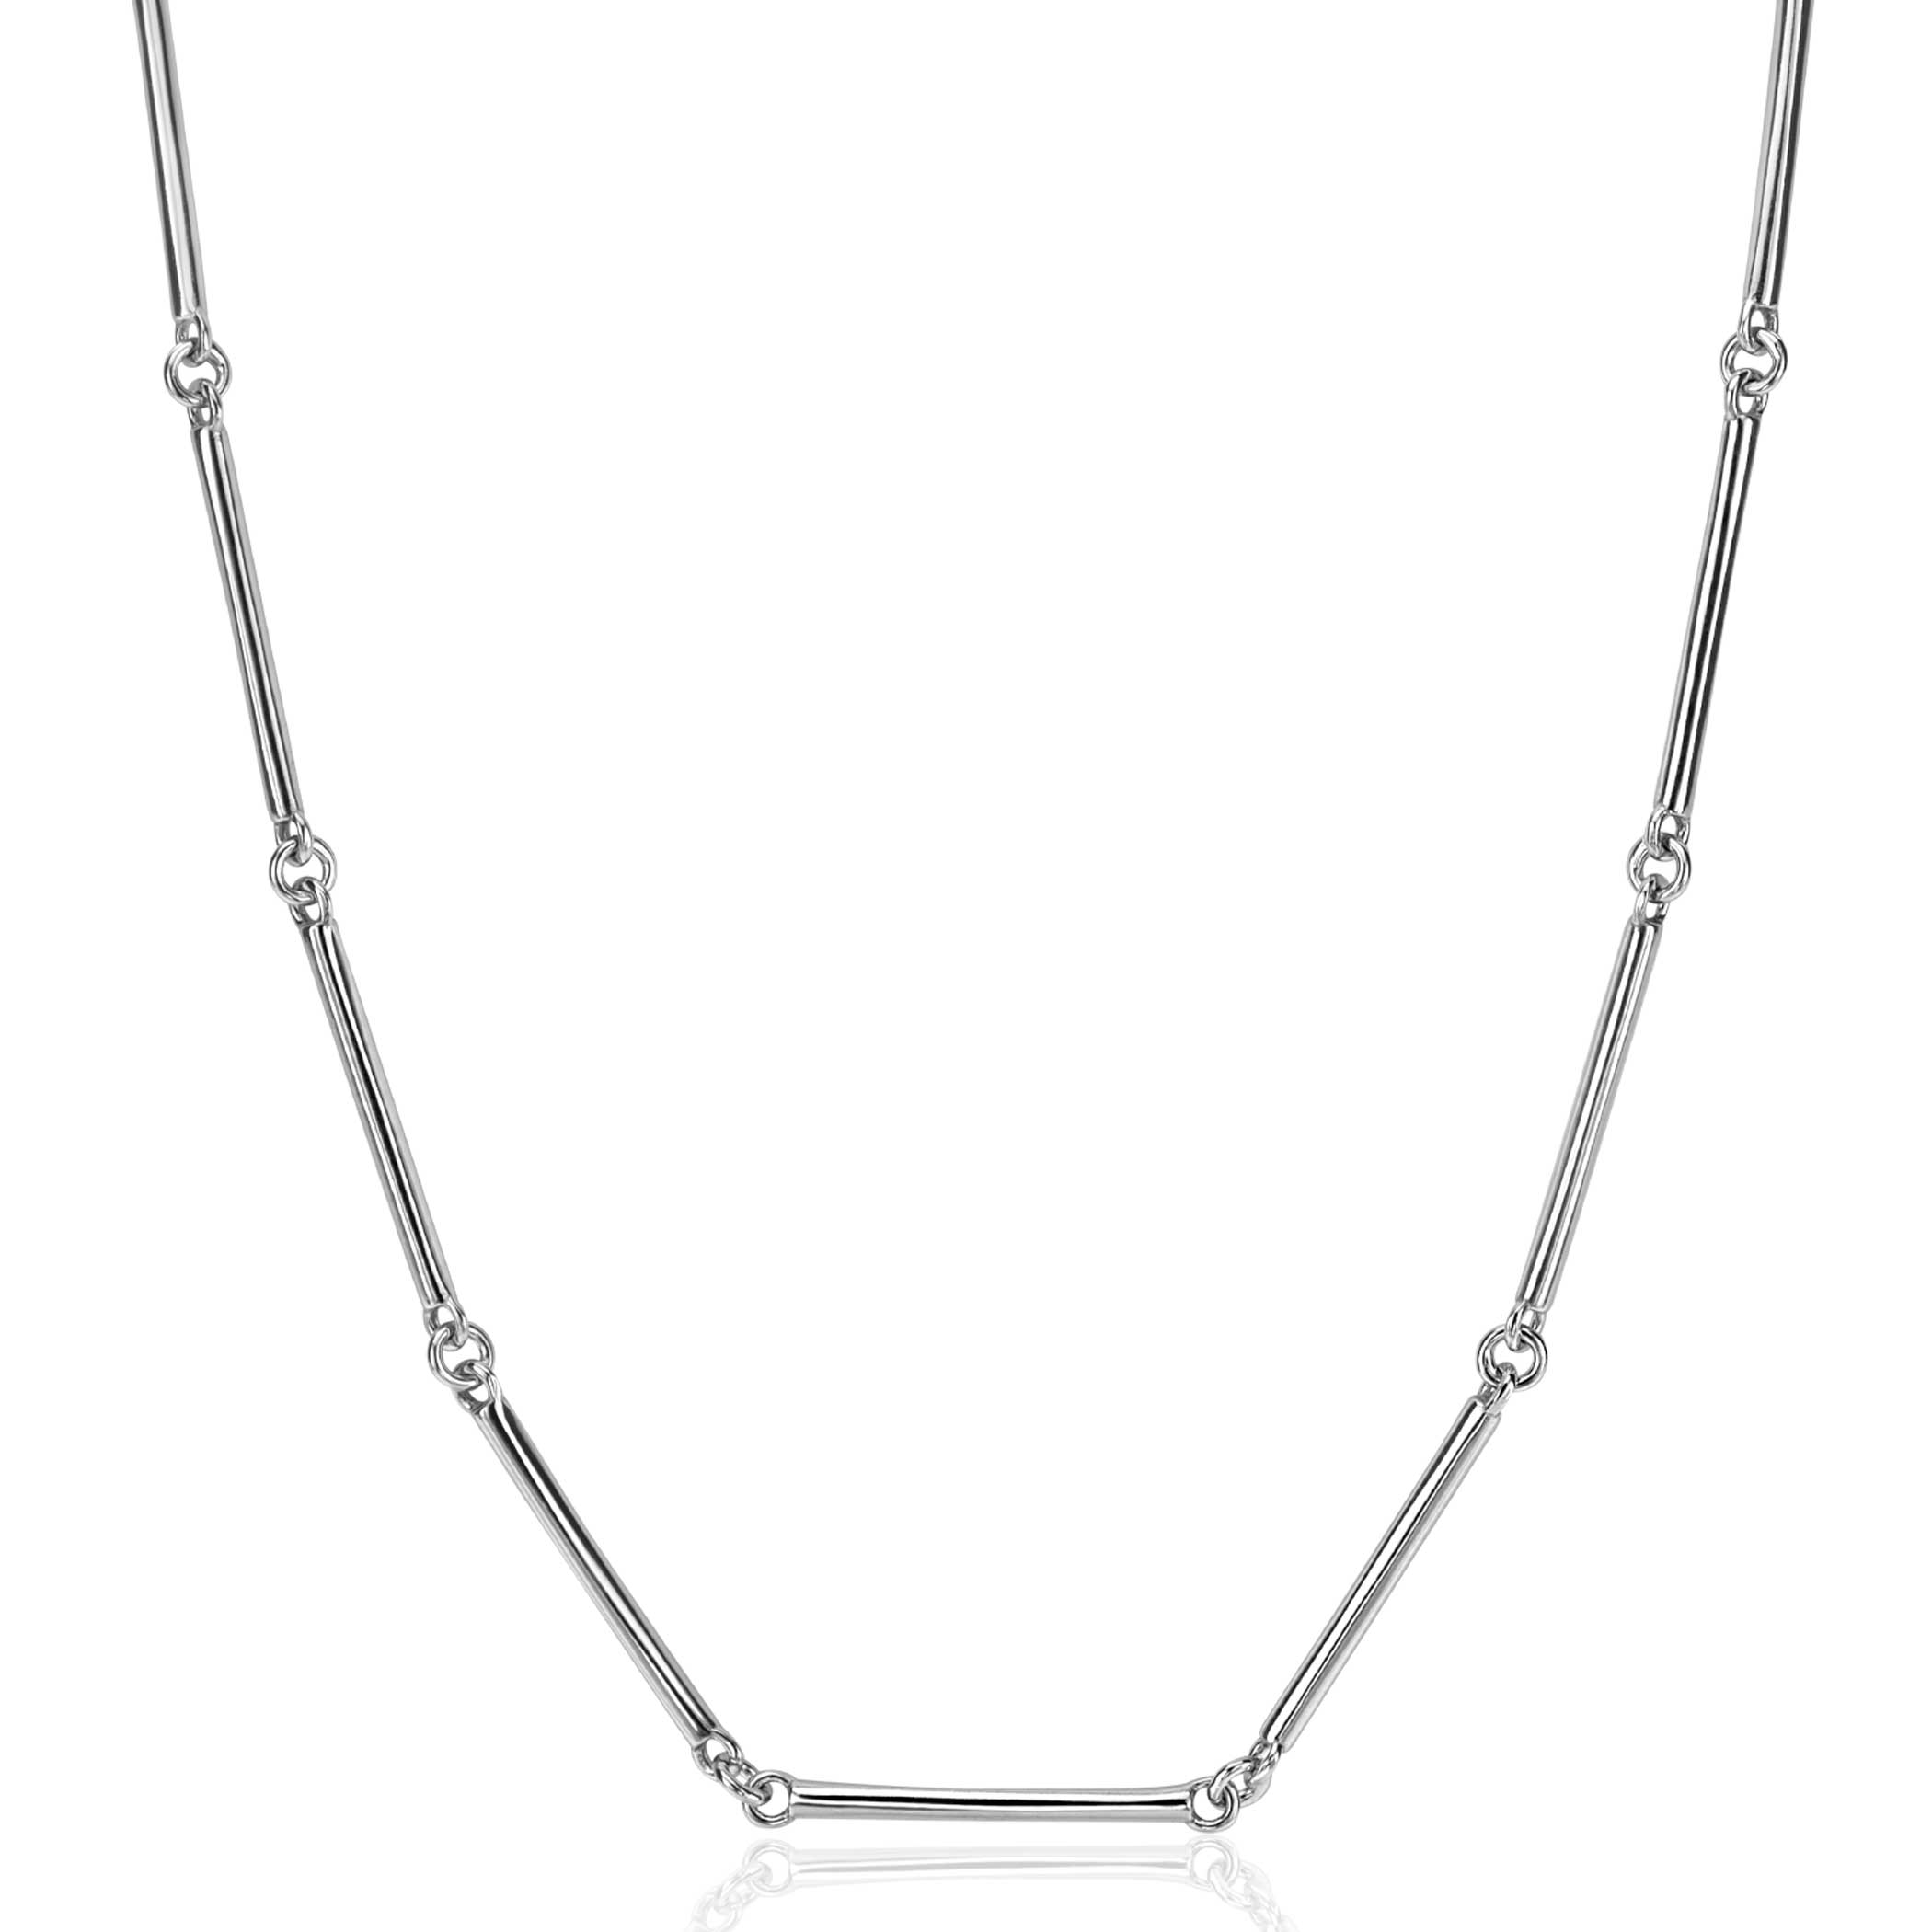 ZINZI Sterling Silver Necklace with Long Shiny Bars (21mm) 41-45cm ZIC2539